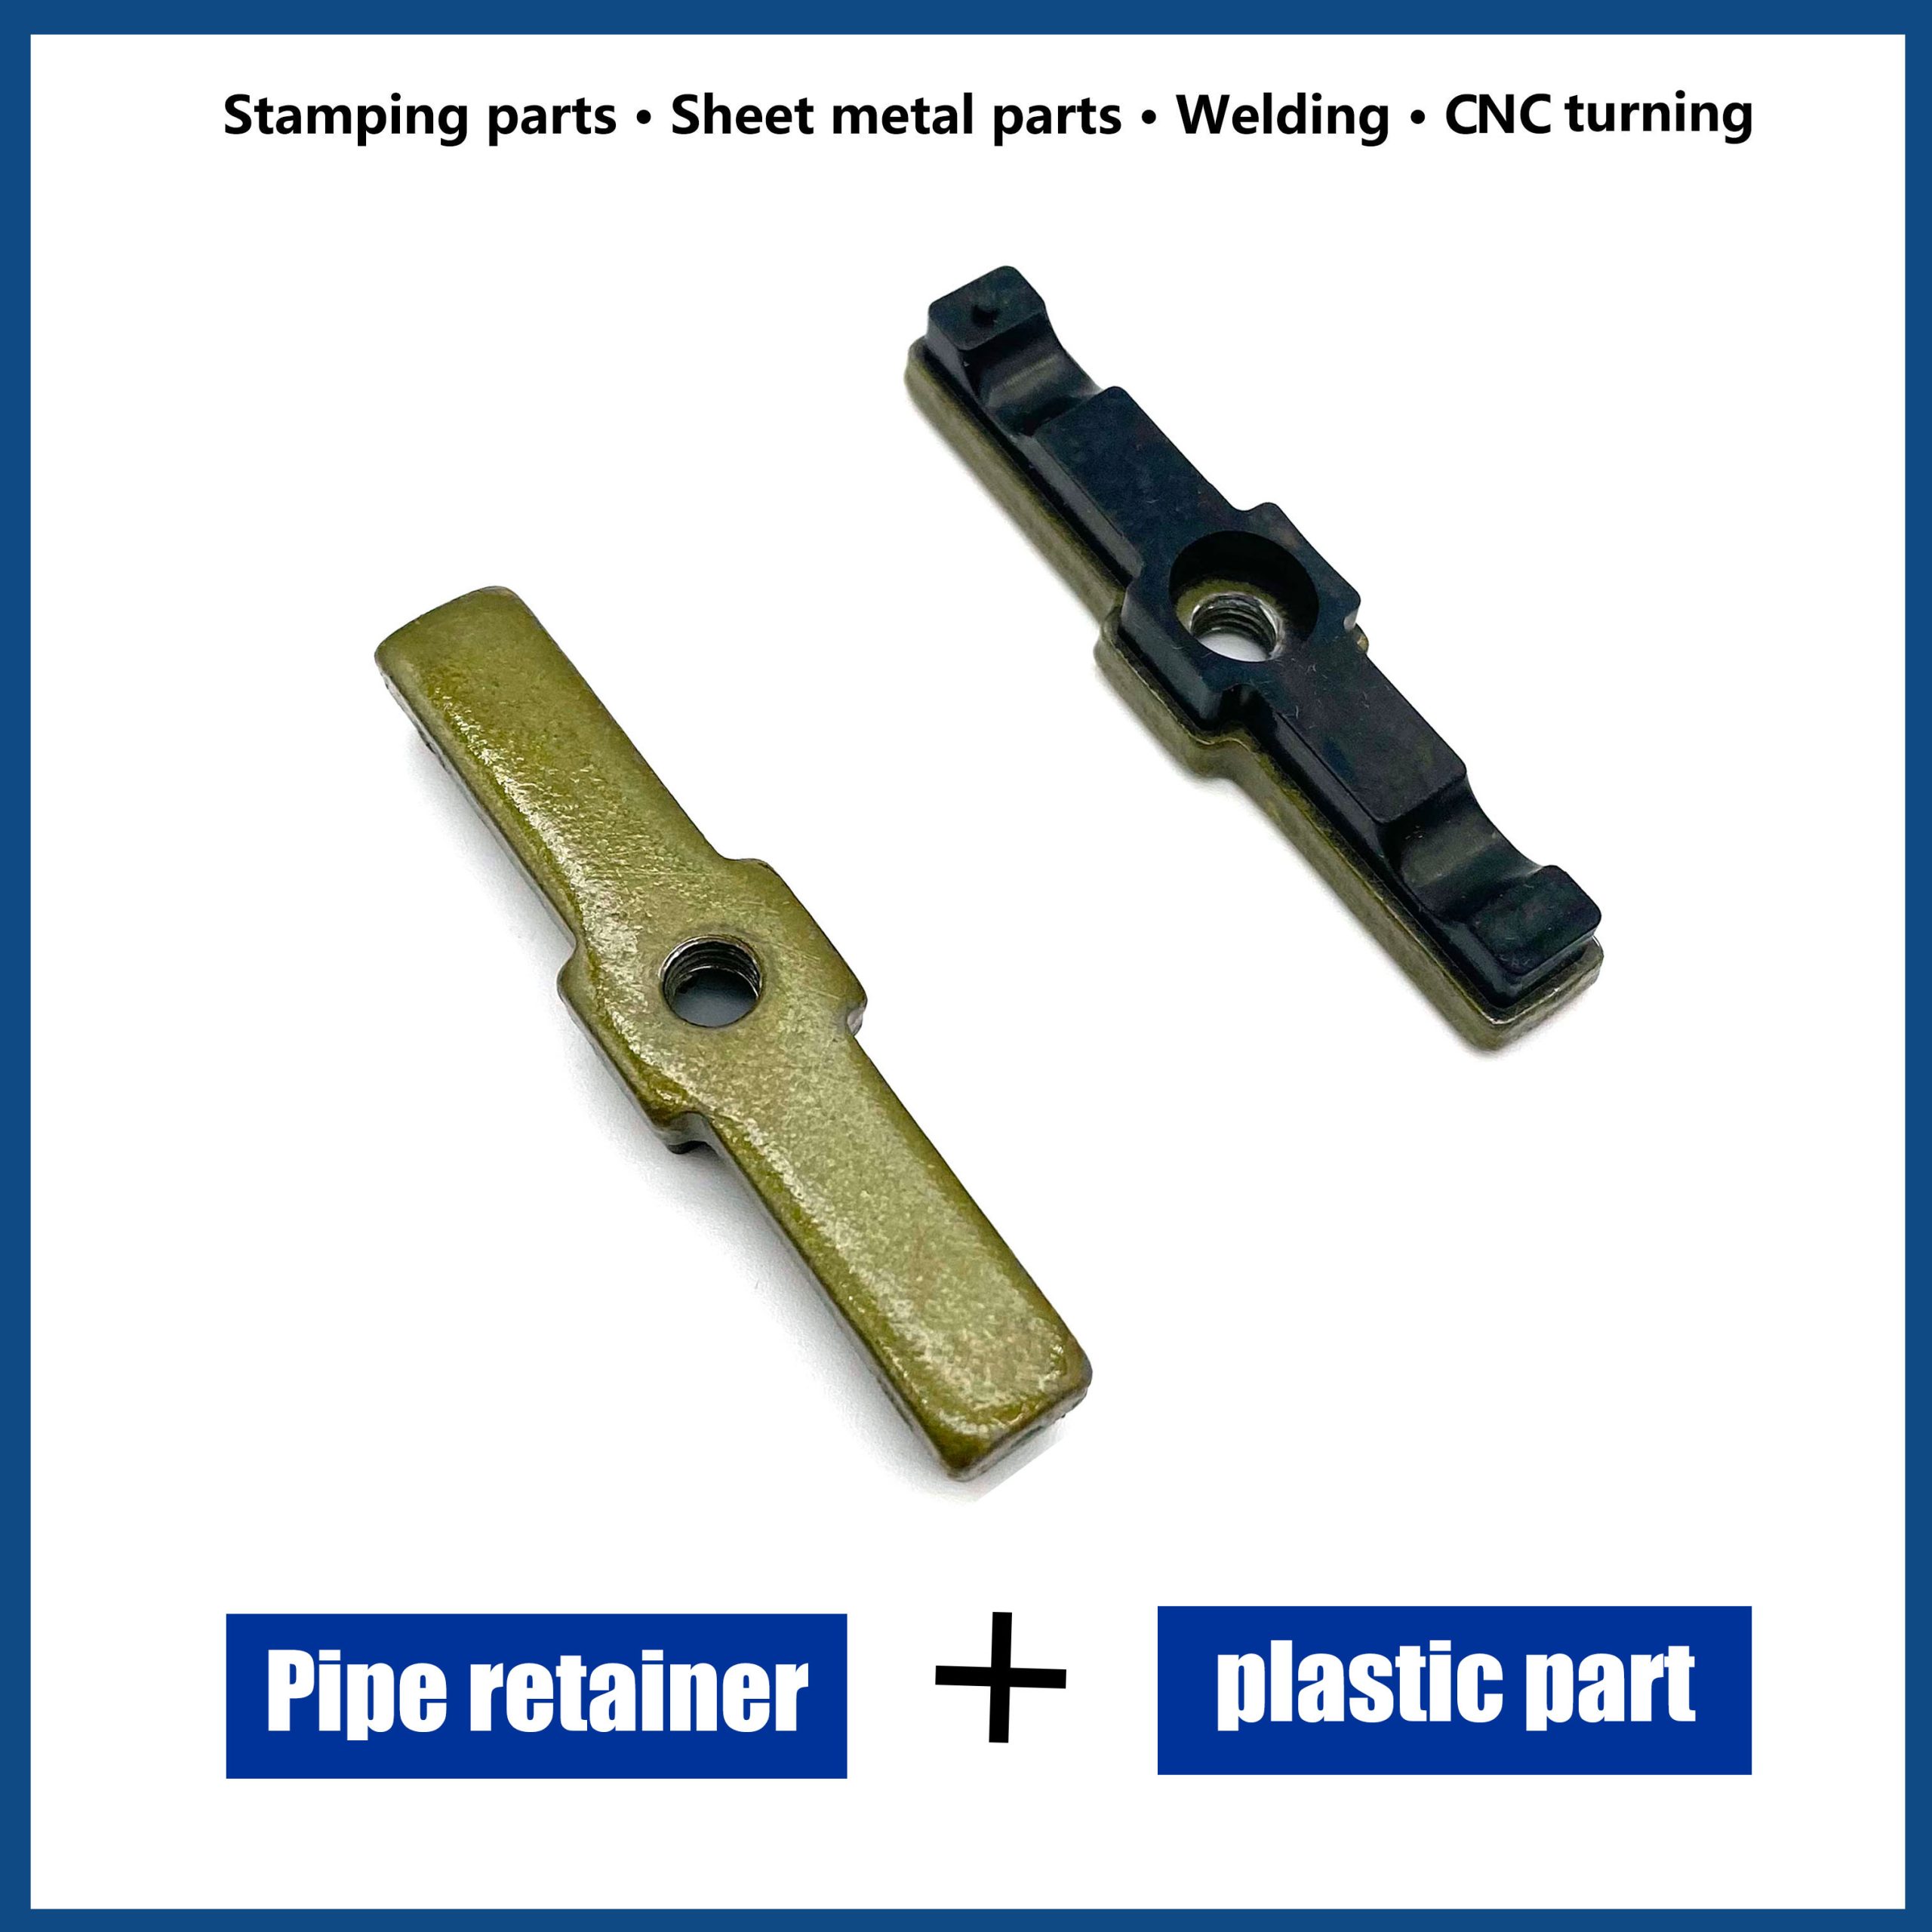 pipe retainer including stamped steel part and plastic part